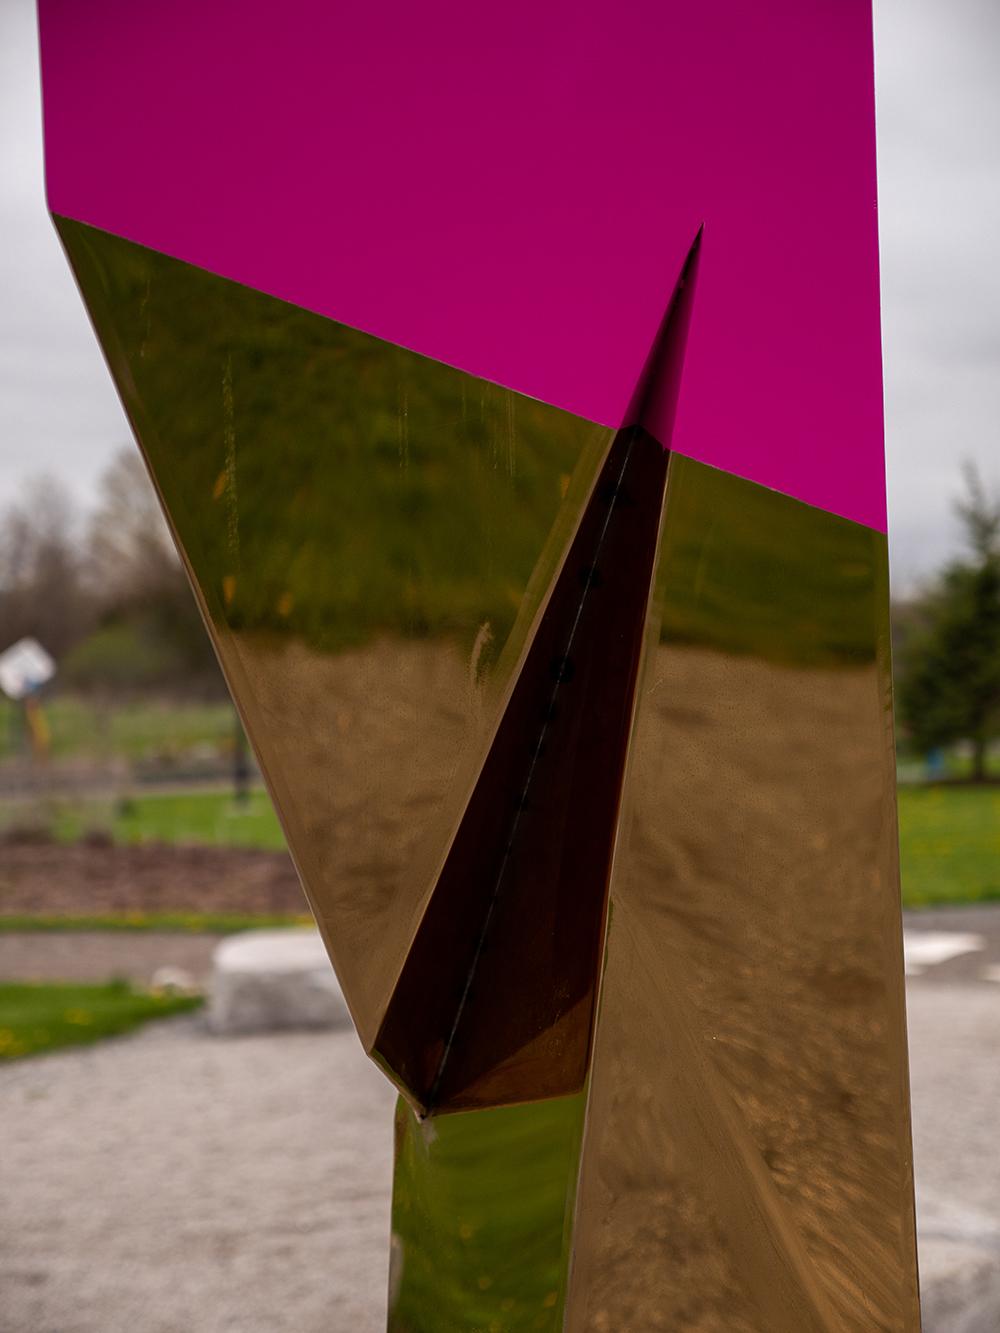 Fragment- Gold Plated Stainless Steel - post-pop, abstract, outdoor sculpture - Contemporary Sculpture by Viktor Mitic